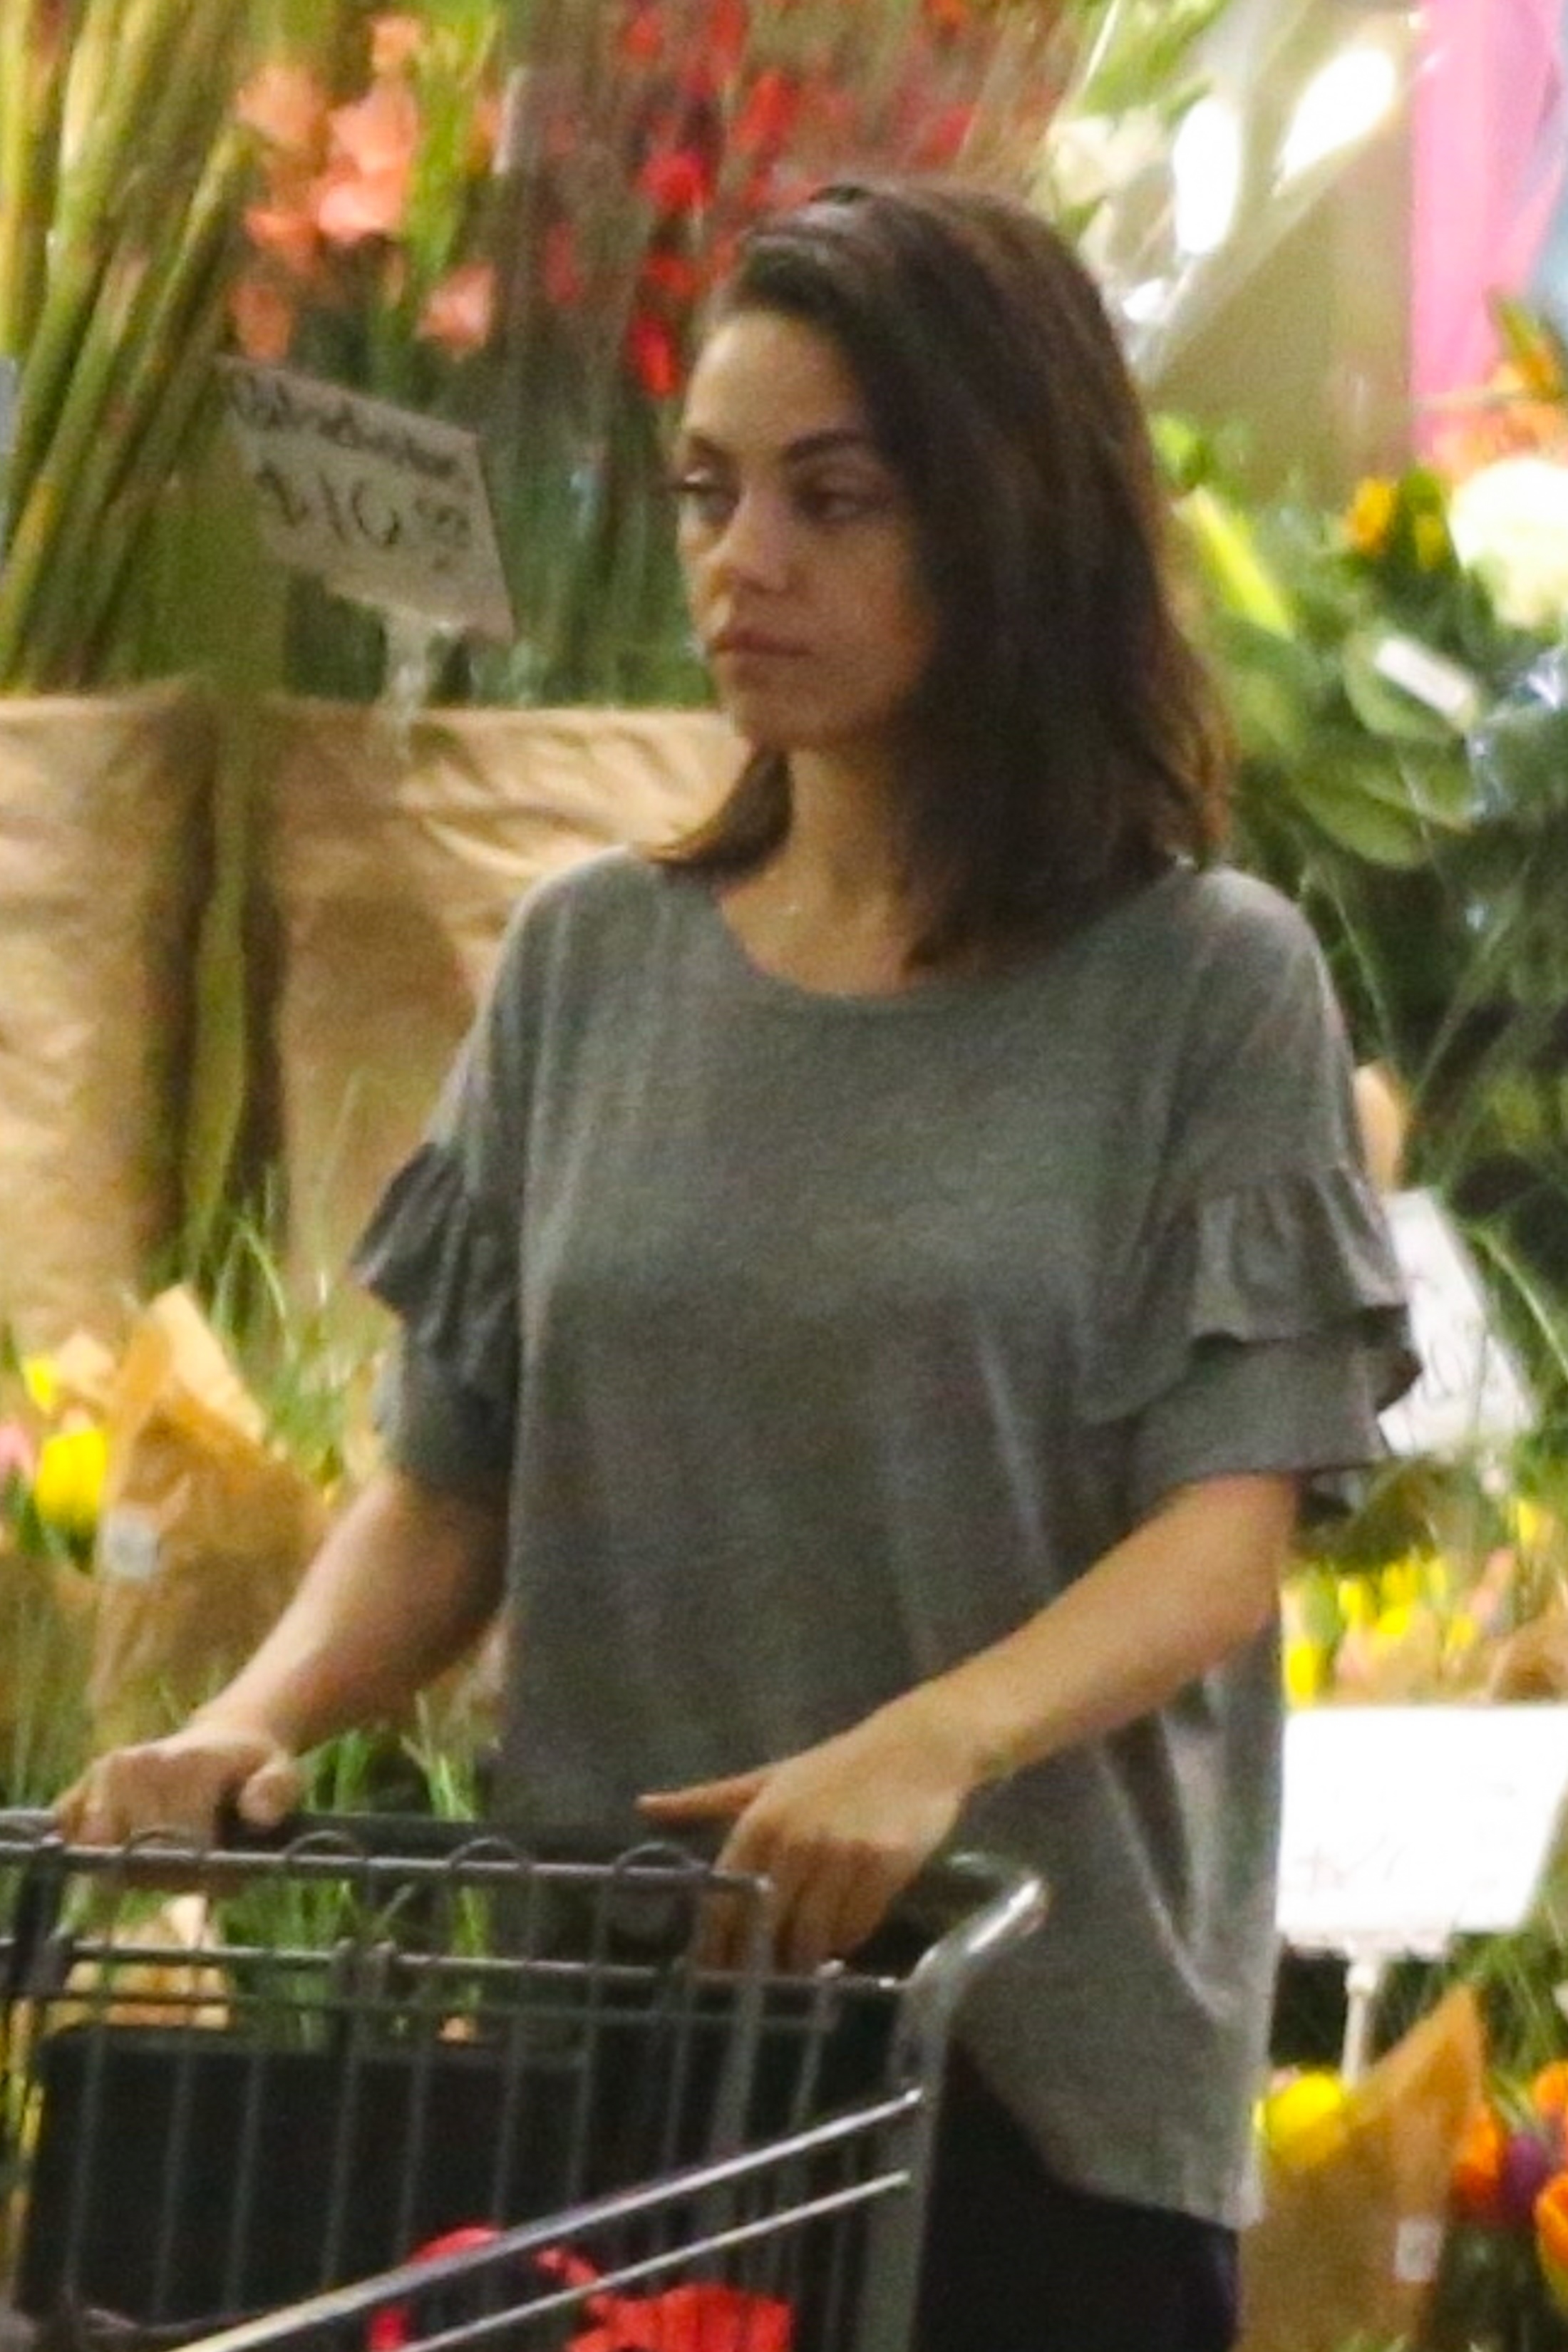 mila-kunis-shopping-at-whole-foods-in-beverly-hills-32918-2.jpg